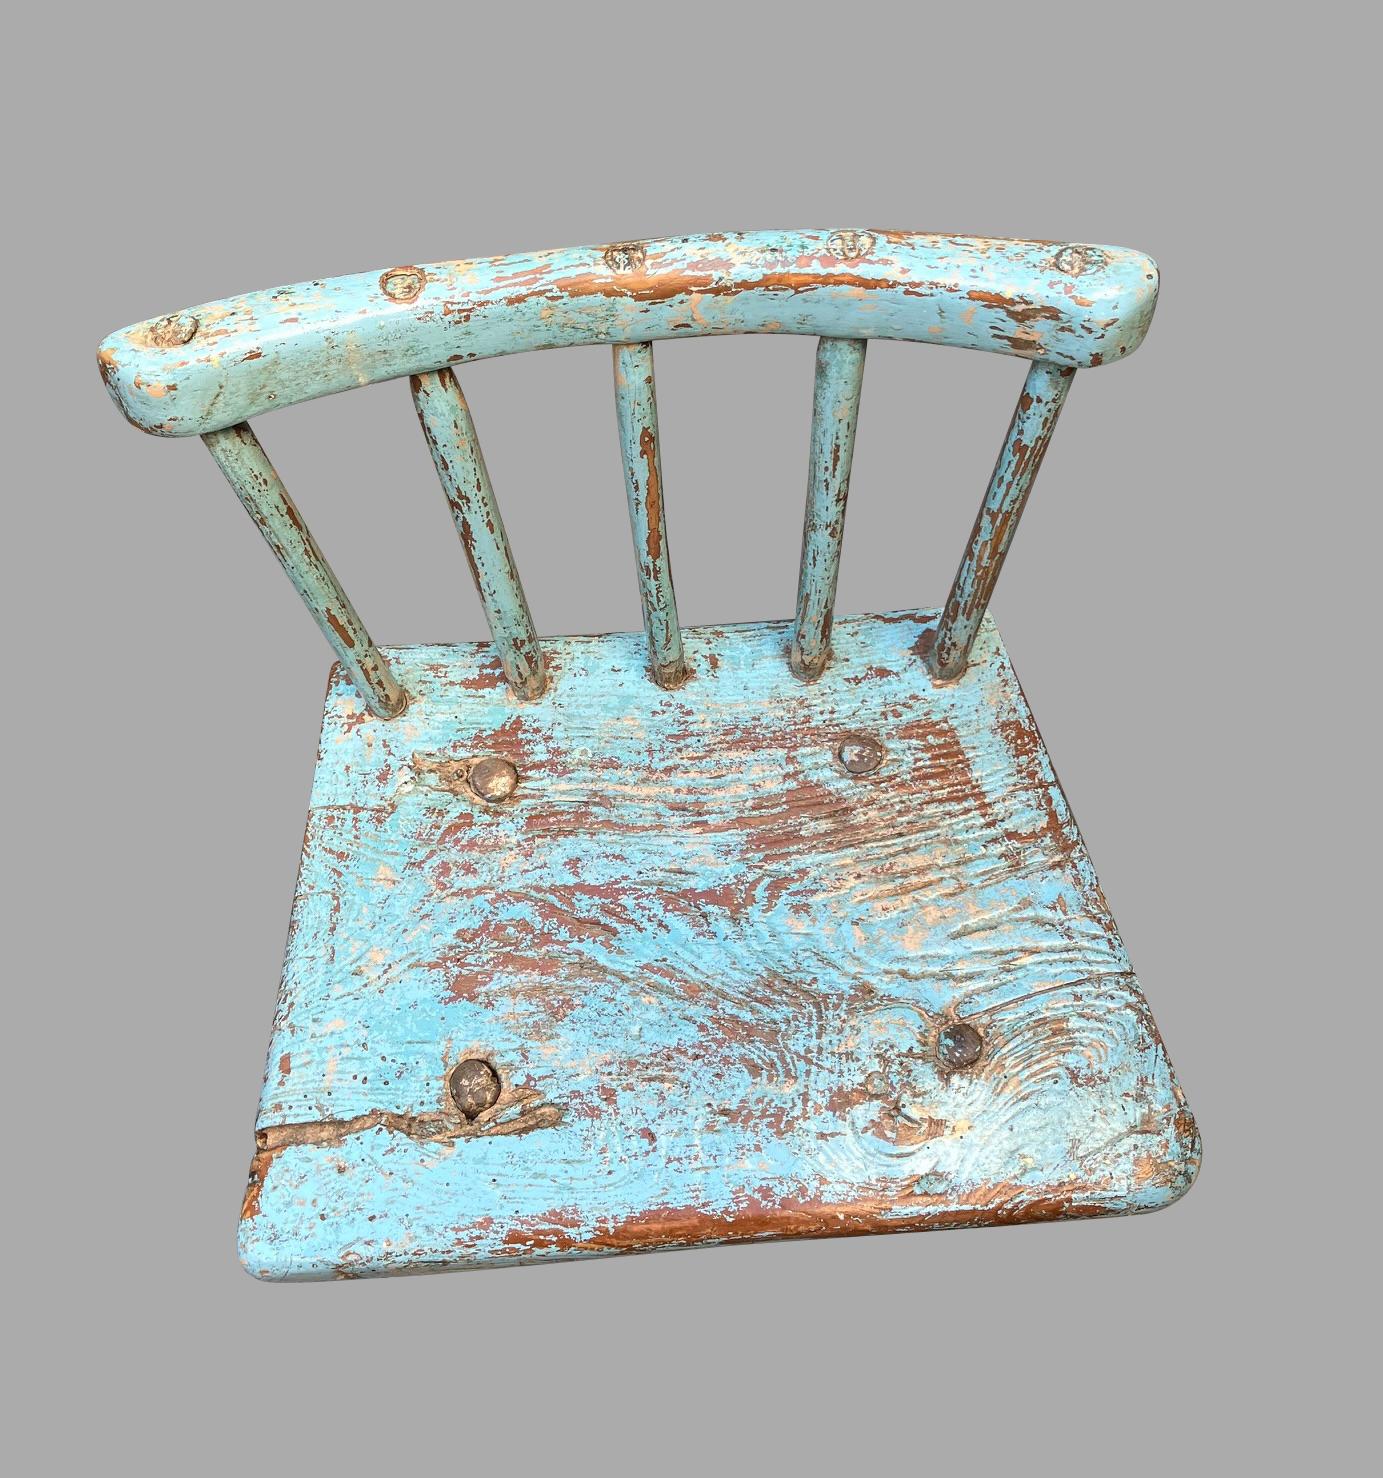 Beech Charming English Rustic Windsor Child's Chair in Old Blue Paint